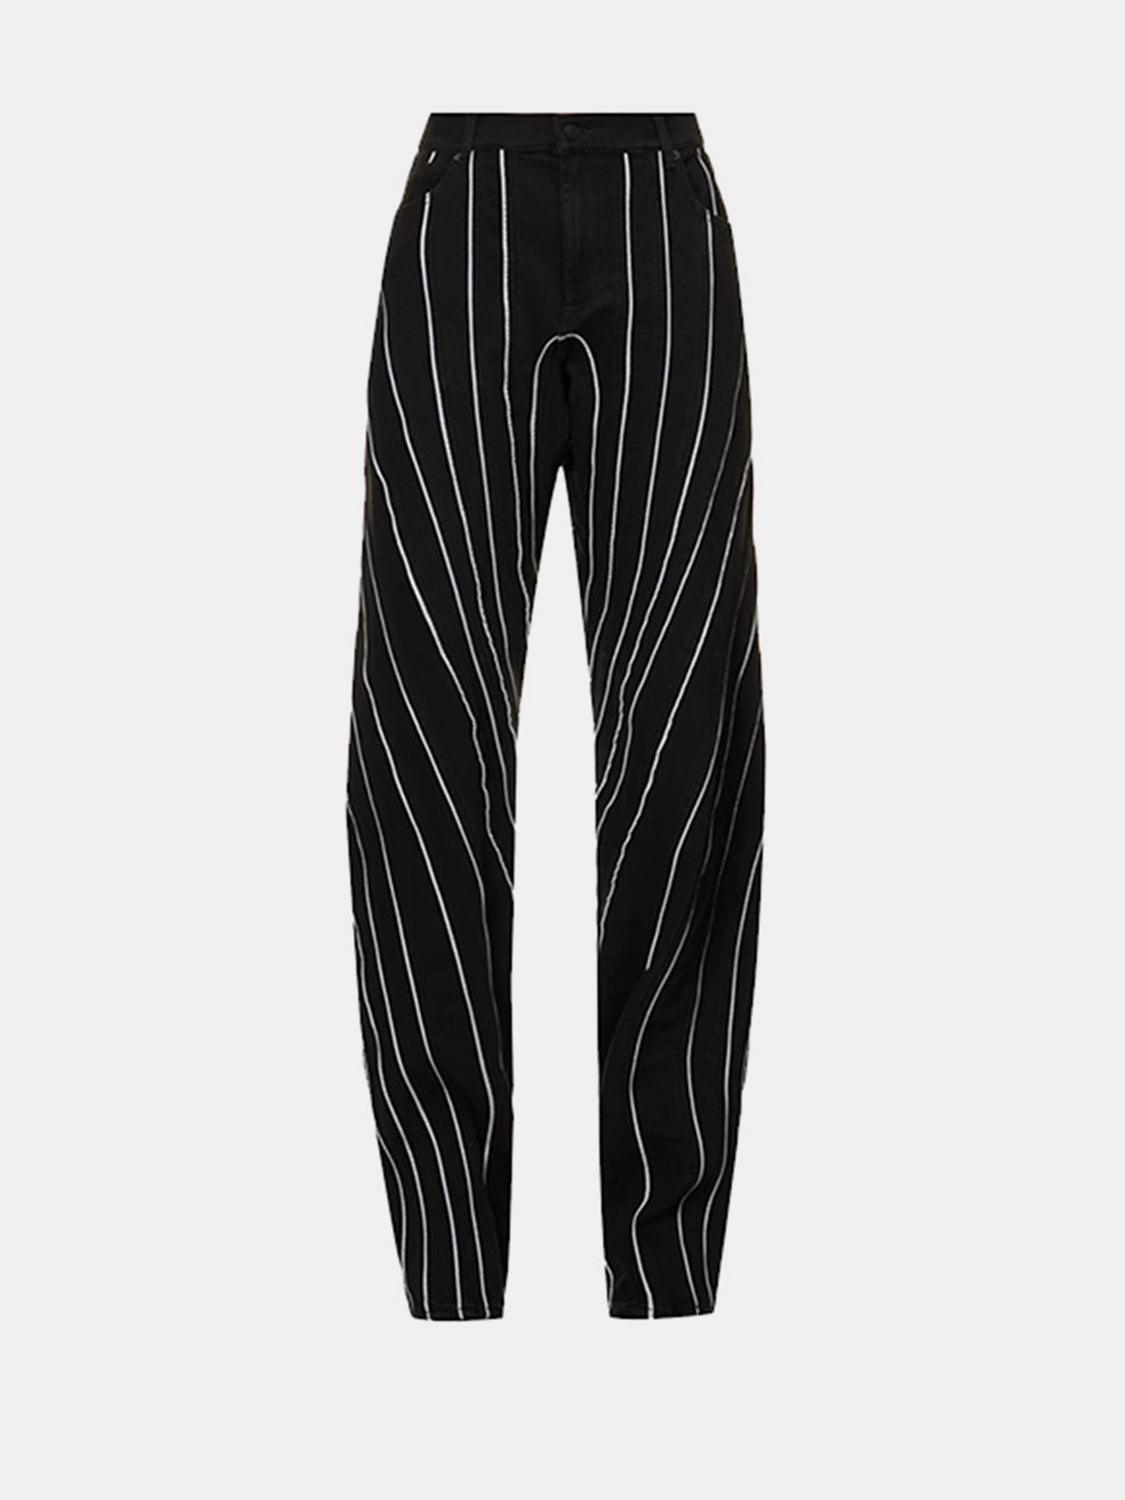 a picture of a black and white striped pants